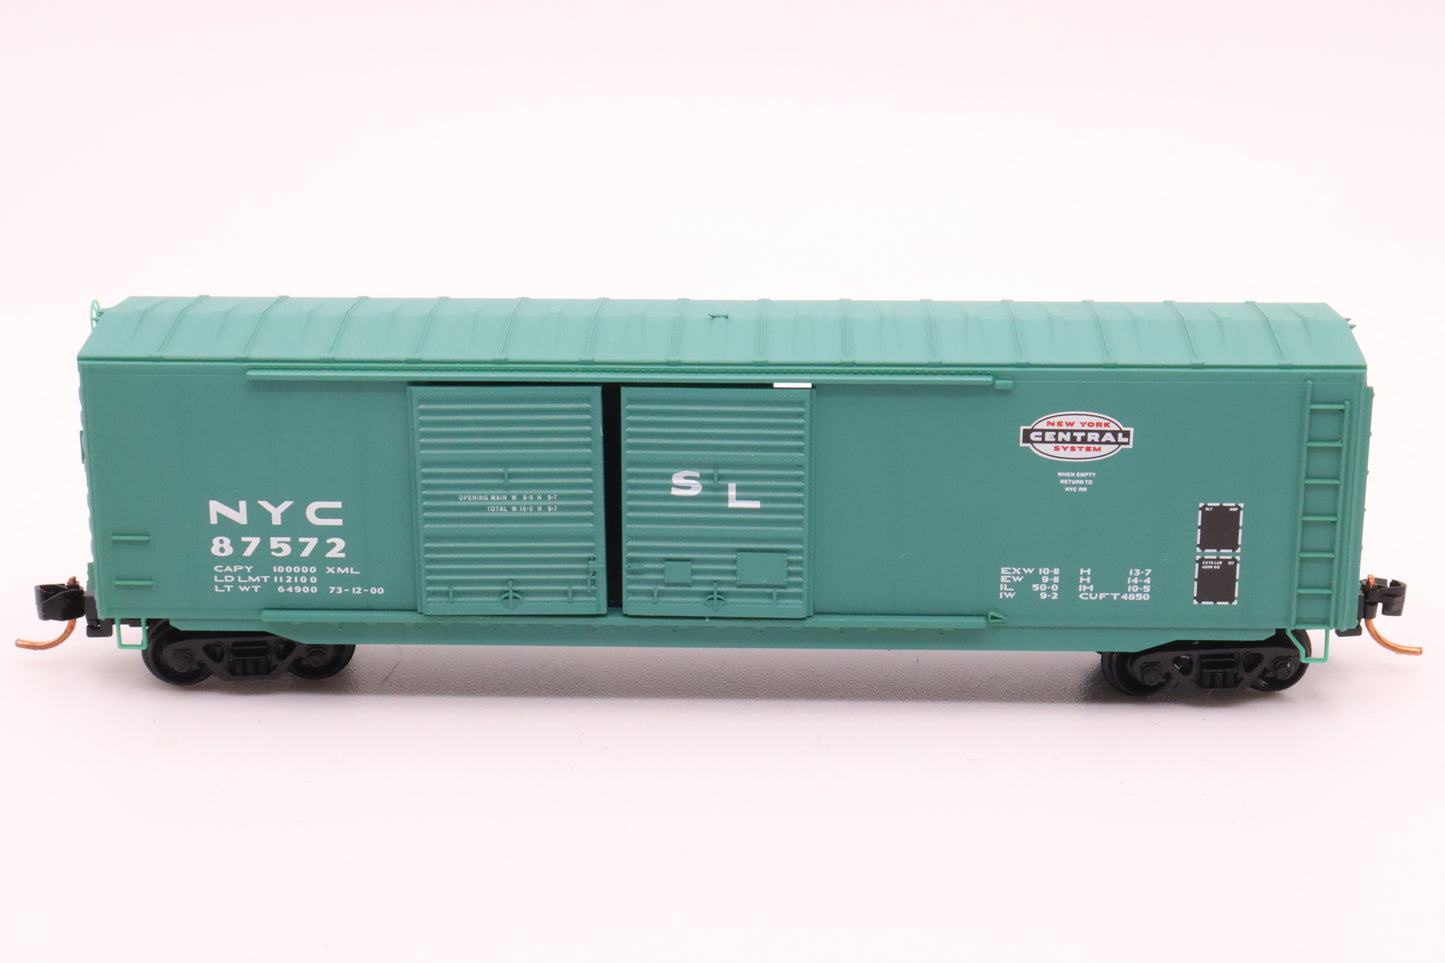 MTL-037 00 110 - 50' Standard Box Car, Double Doors, w/o Roofwalk - New York Central - NYC #87572